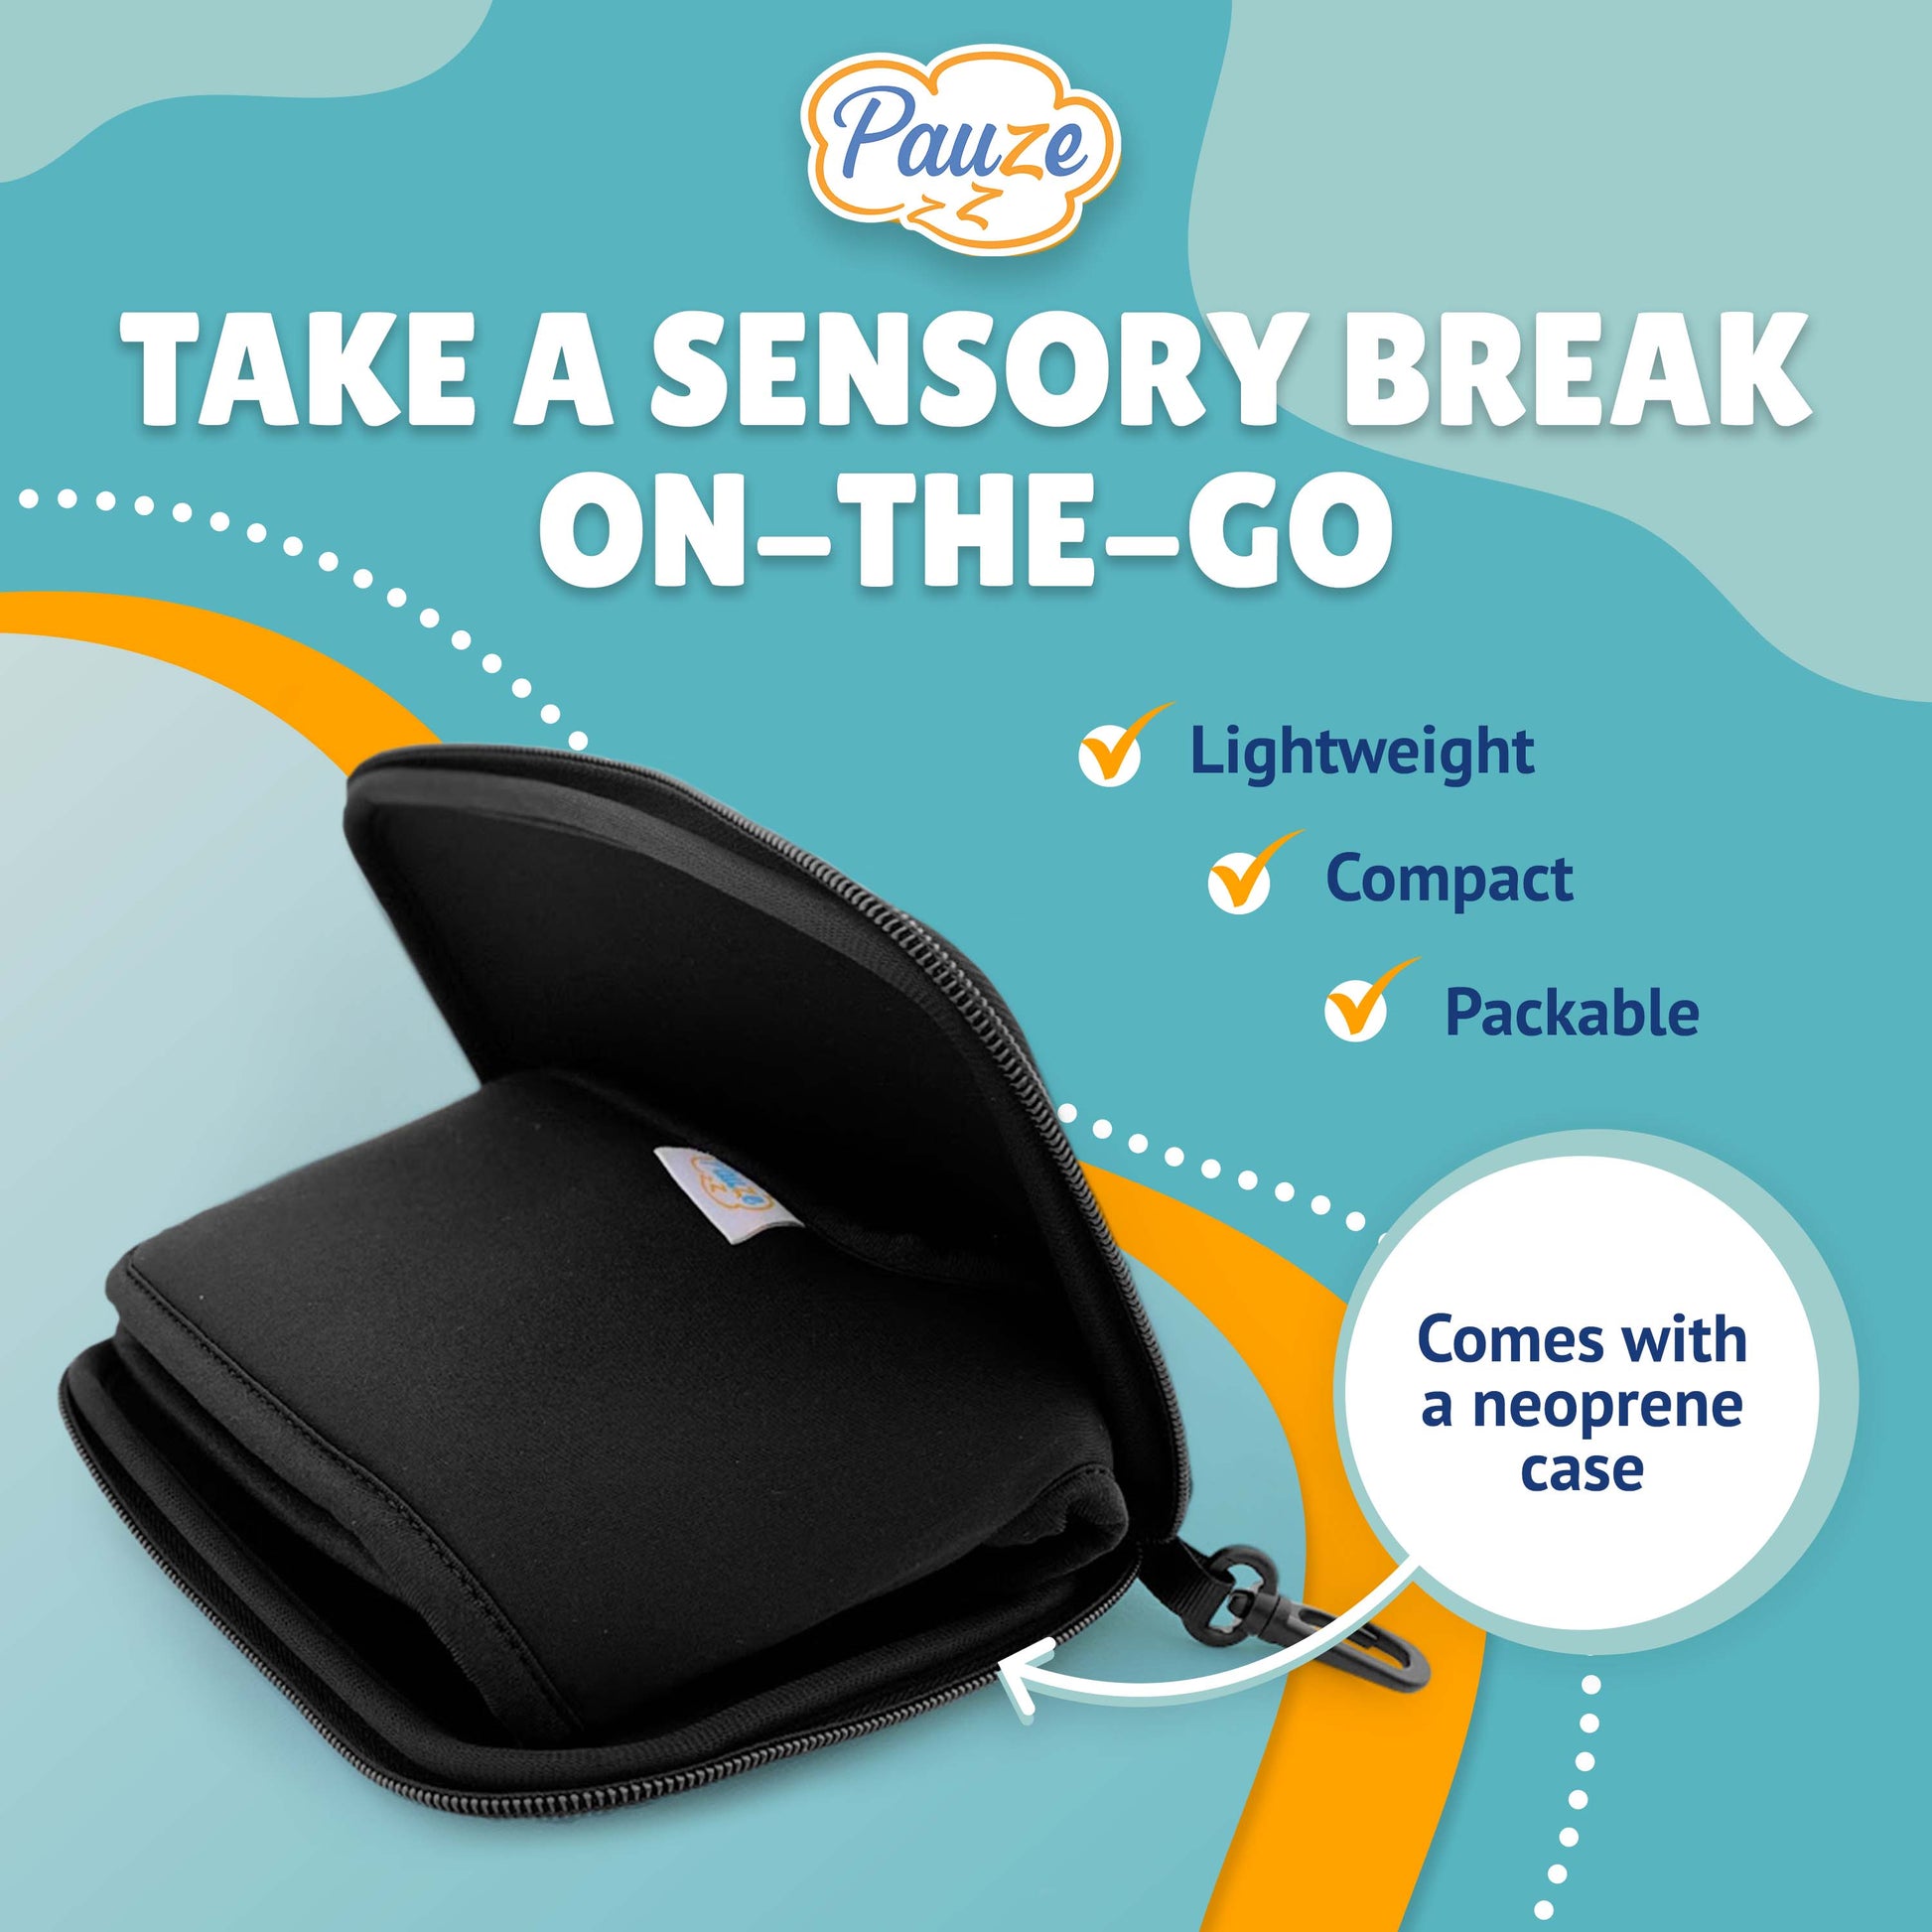 Graphic with pauze mask in case. Graphic says "Take a sensory break on-the-go" Lightweight, compact, packable. Comes with a neoprene case 